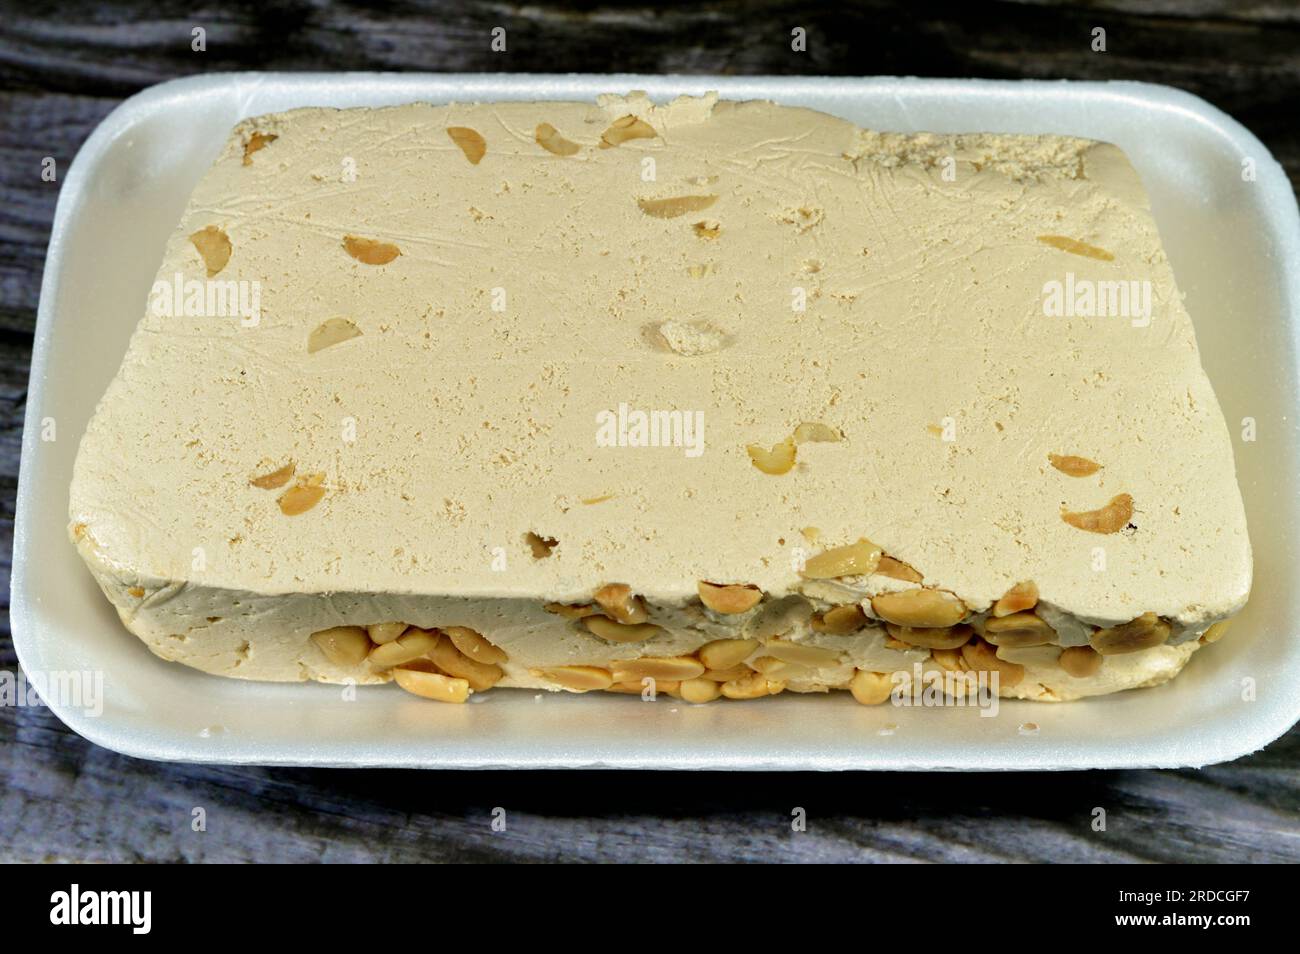 Traditional tahini halva with peanuts or Halawa Tahiniya, the primary ingredients in this confection are sesame butter or paste (tahini), and sugar, g Stock Photo